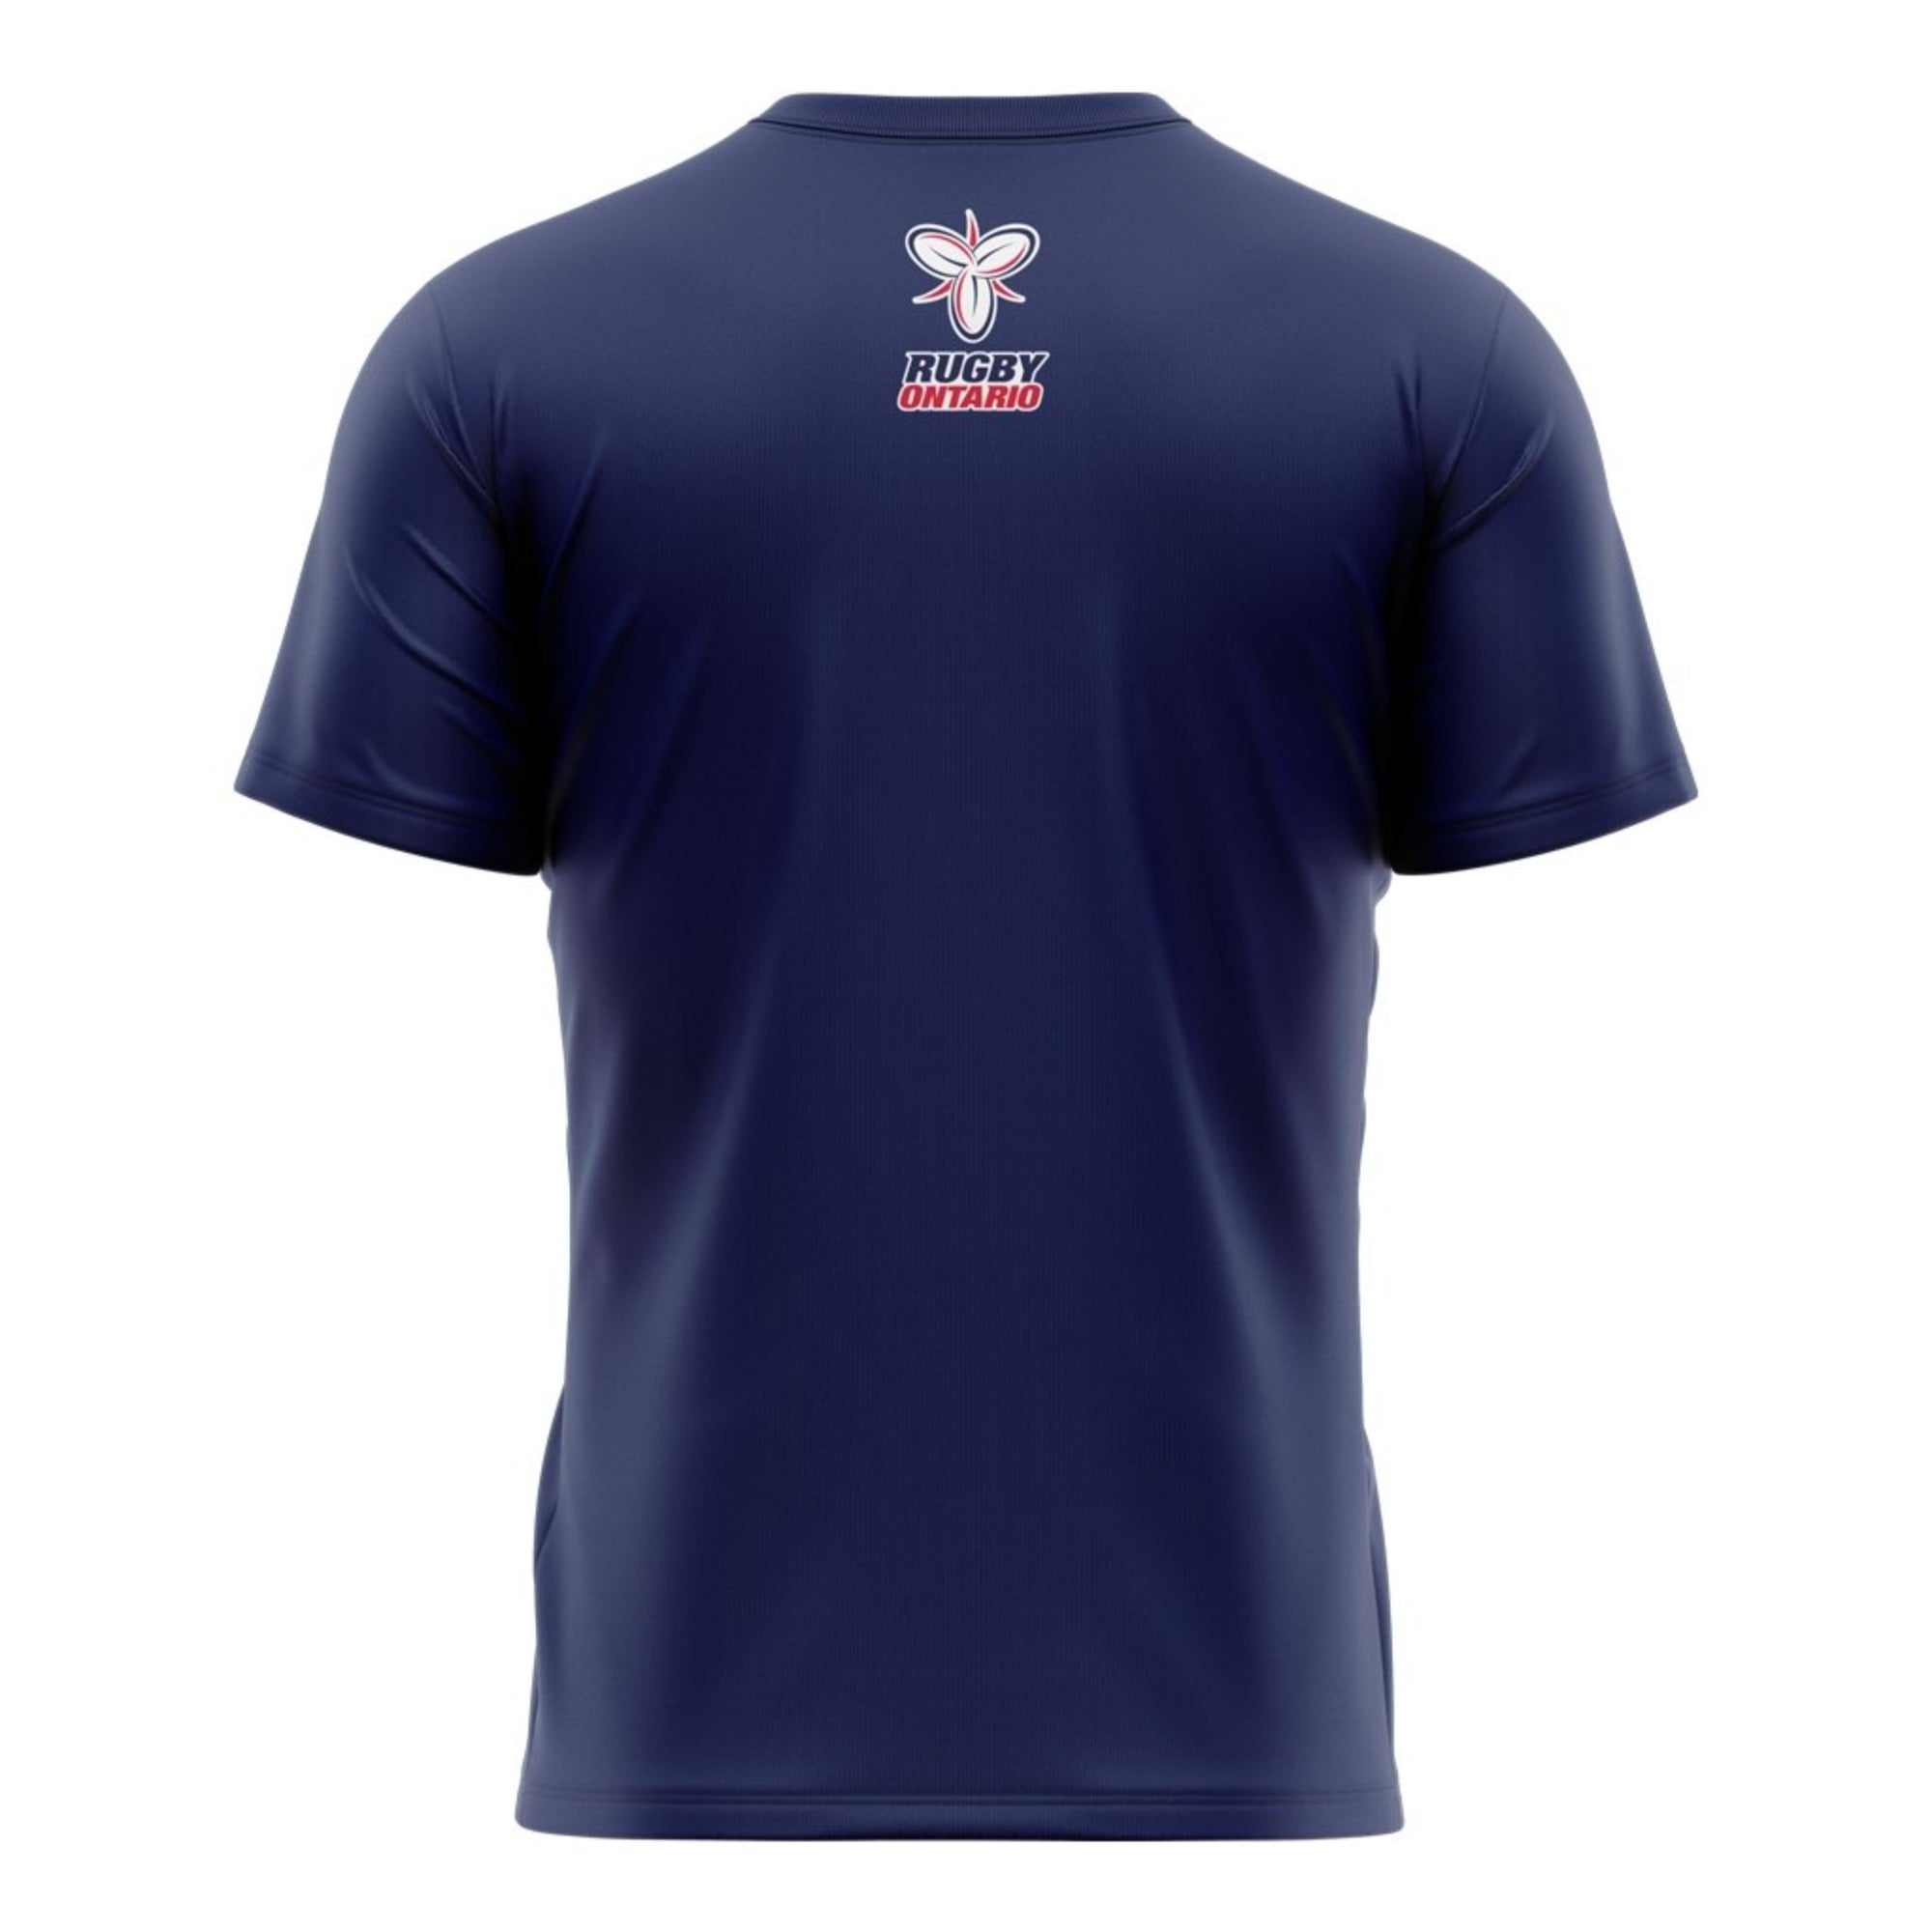 Rugby Ontario "TRY" Tee - Men's - www.therugbyshop.com www.therugbyshop.com MEN'S / NAVY / XS SANMAR TEES Rugby Ontario "TRY" Tee - Men's